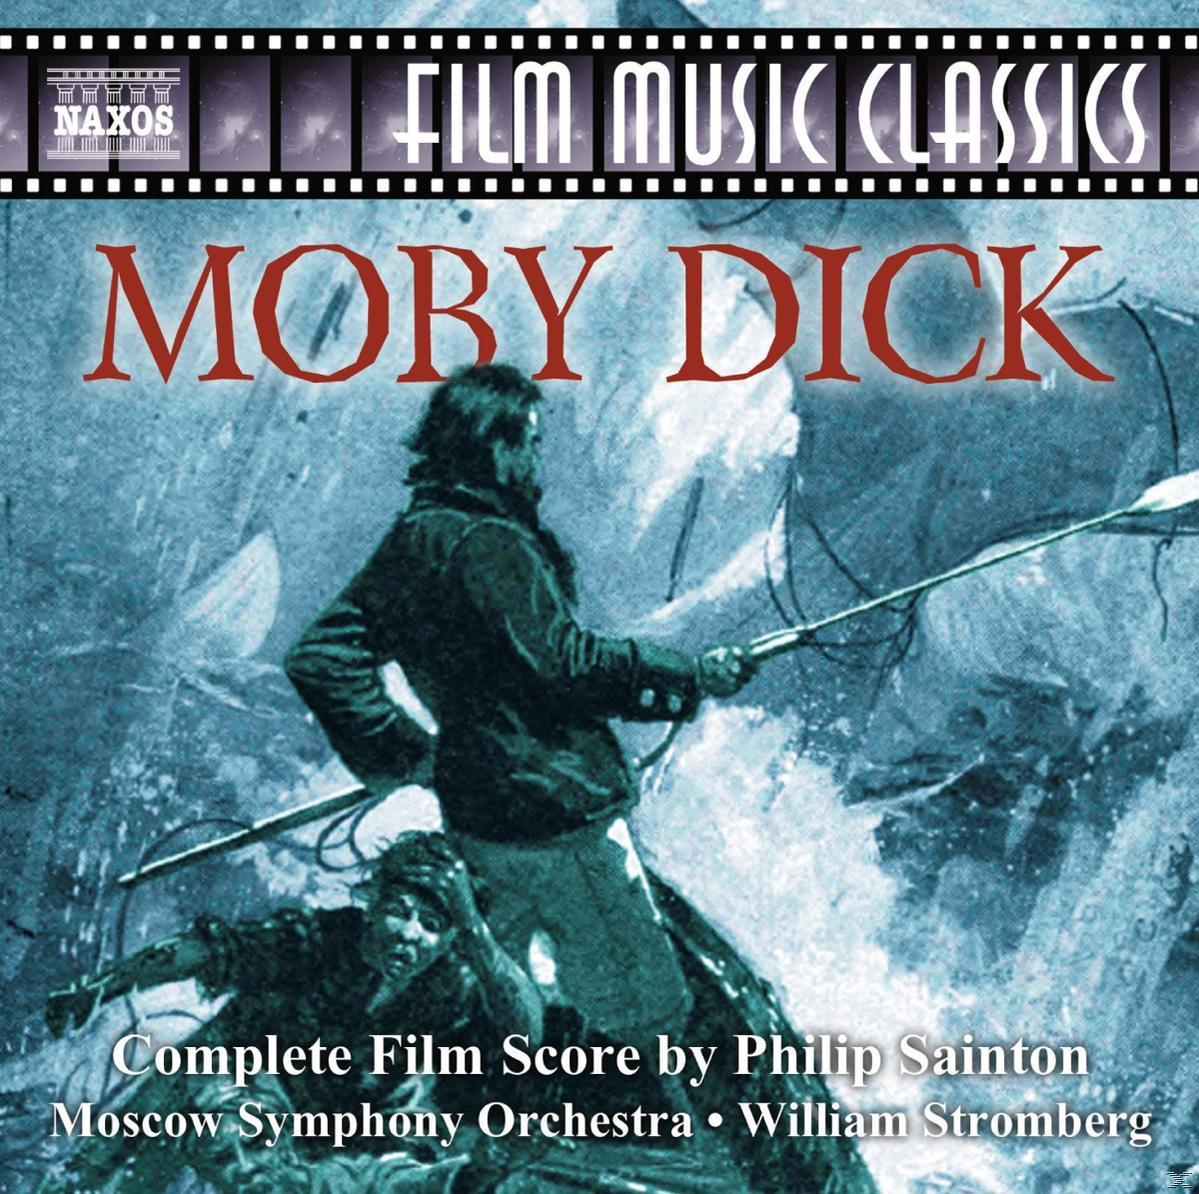 - Symphony - (CD) DICK Moscow Orchestra MOBY